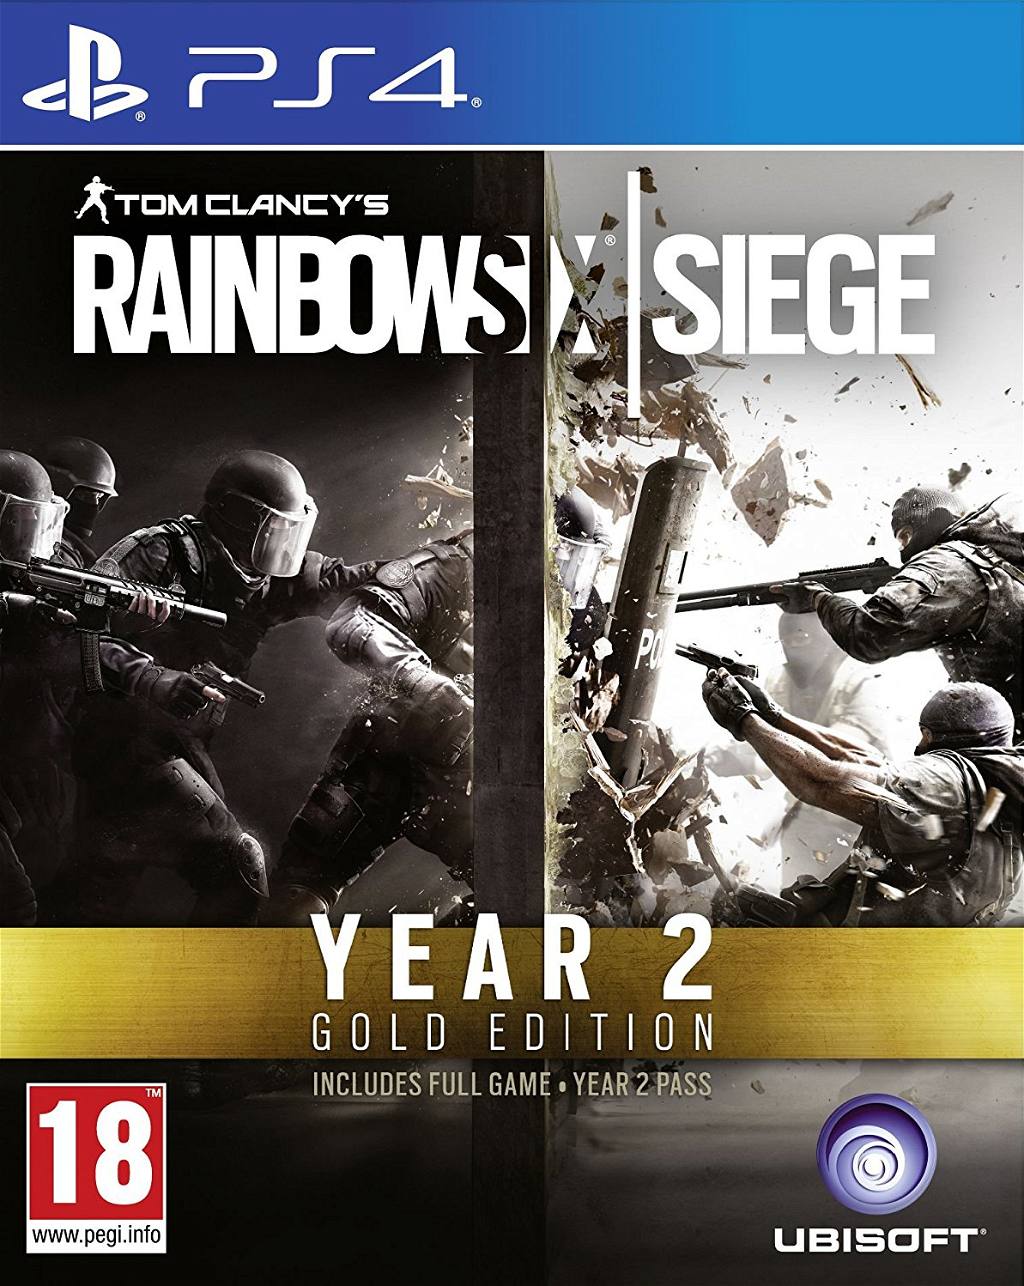 shilling administration tilbede Tom Clancy's Rainbow Six Siege [Year 2 Gold Edition] for PlayStation 4